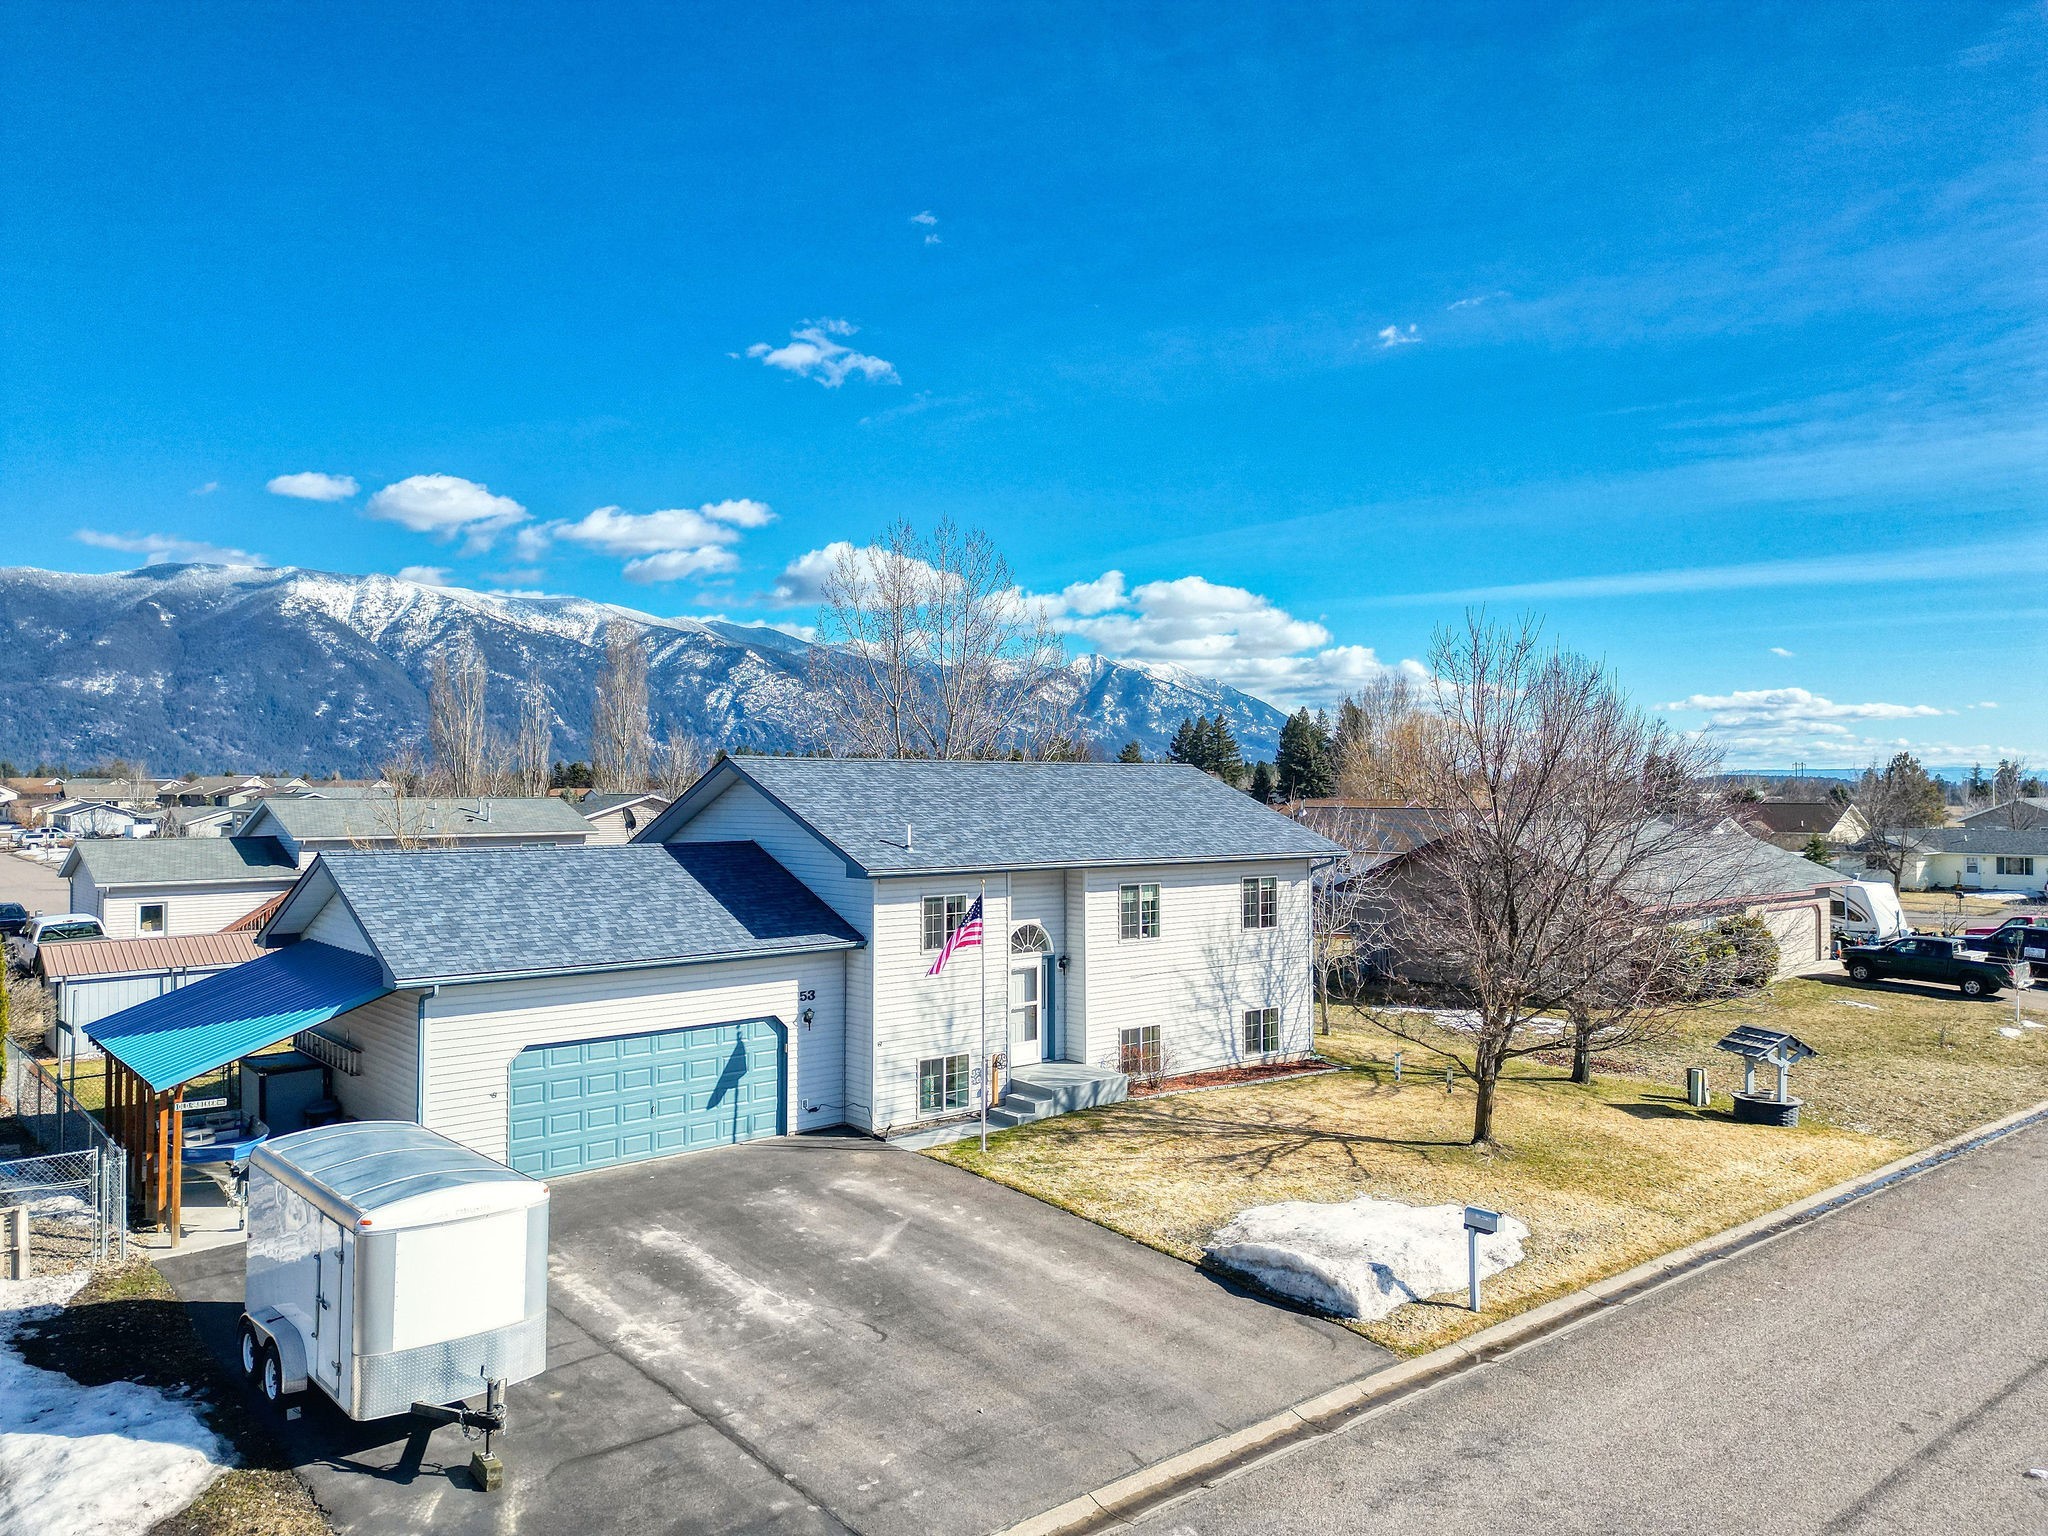 Charming and well maintained split-level home in a highly desirable neighborhood with amazing mountain views! Home features a great room with 3 bedrooms and 2 bathrooms upstairs as well as a kitchen and walk out 2nd level trex deck. Enjoy your morning coffee taking in the views of snow capped mountains! Downstairs boasts 2 family rooms, a 1/2 bath and a laundry room. You will love your heated 2 car attached garage with a lean-to on the side with room for a boat or toy storage. The front and back yard has an irrigation system and has been treated yearly by TruGreen. The beautiful back yard is fenced in and there is a shed for extra storage. This home has had one owner and has been meticulously maintained. Roof is 2 years old, Trex deck is 3-4 years old. Upstairs carpet is 3 months old. Freezer in garage, refrigerator, washer and dryer in basement, and all appliances upstairs except microwave to be included in sale of property. Move in Ready!